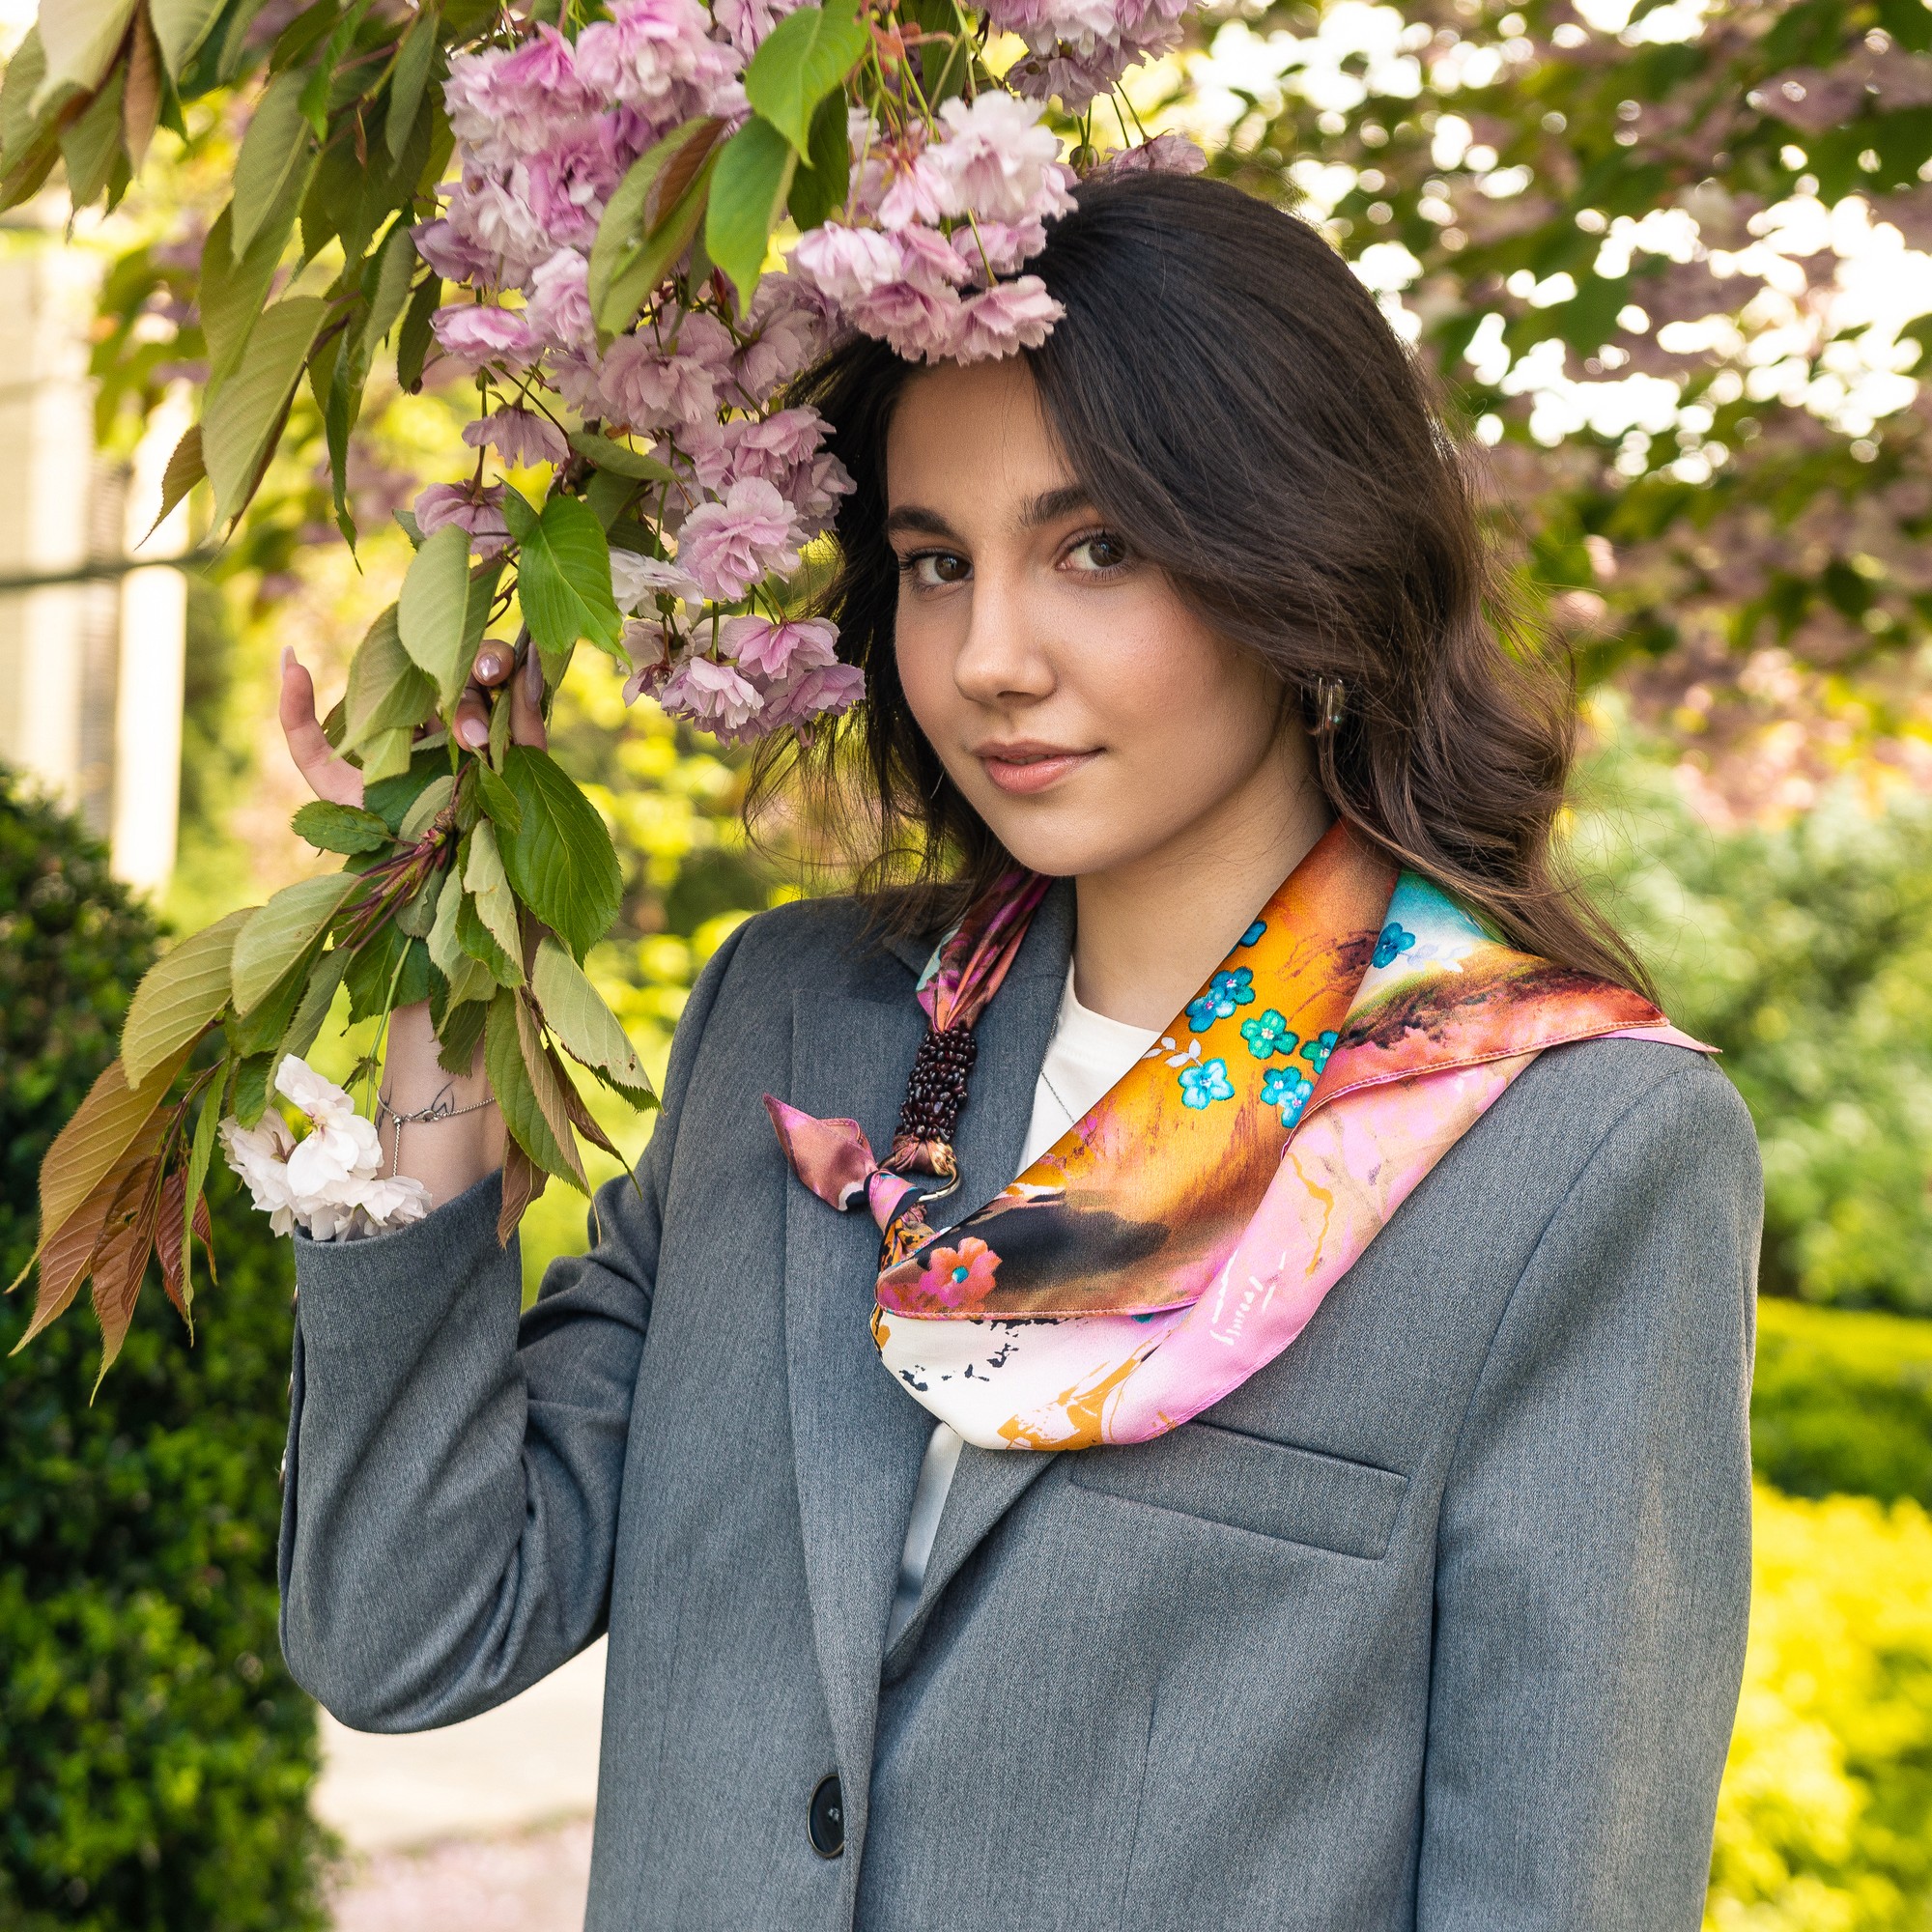 Scarf "Pink sakura" from the brand MyScarf. Decorated with natural   stone granet